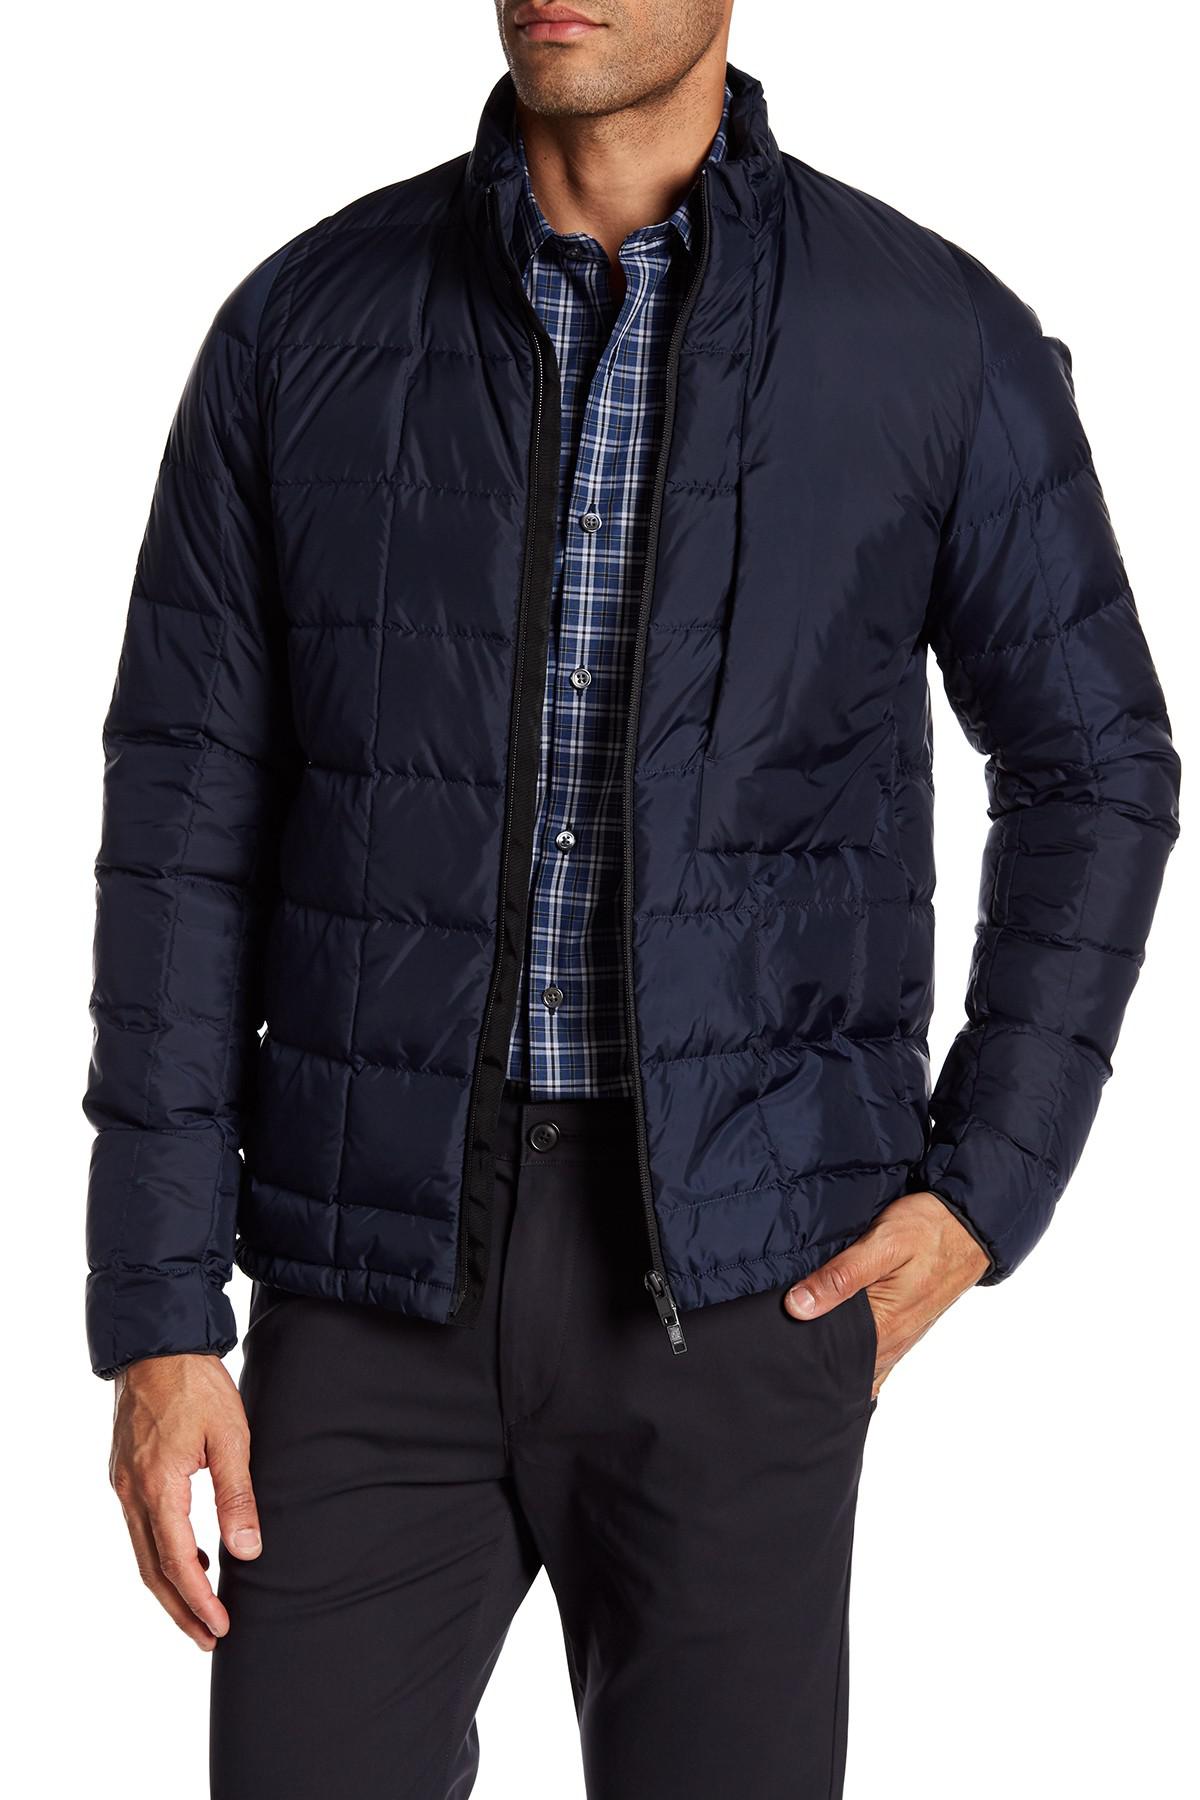 Theory Synthetic Wiles Watts Down Jacket in Blue for Men - Lyst